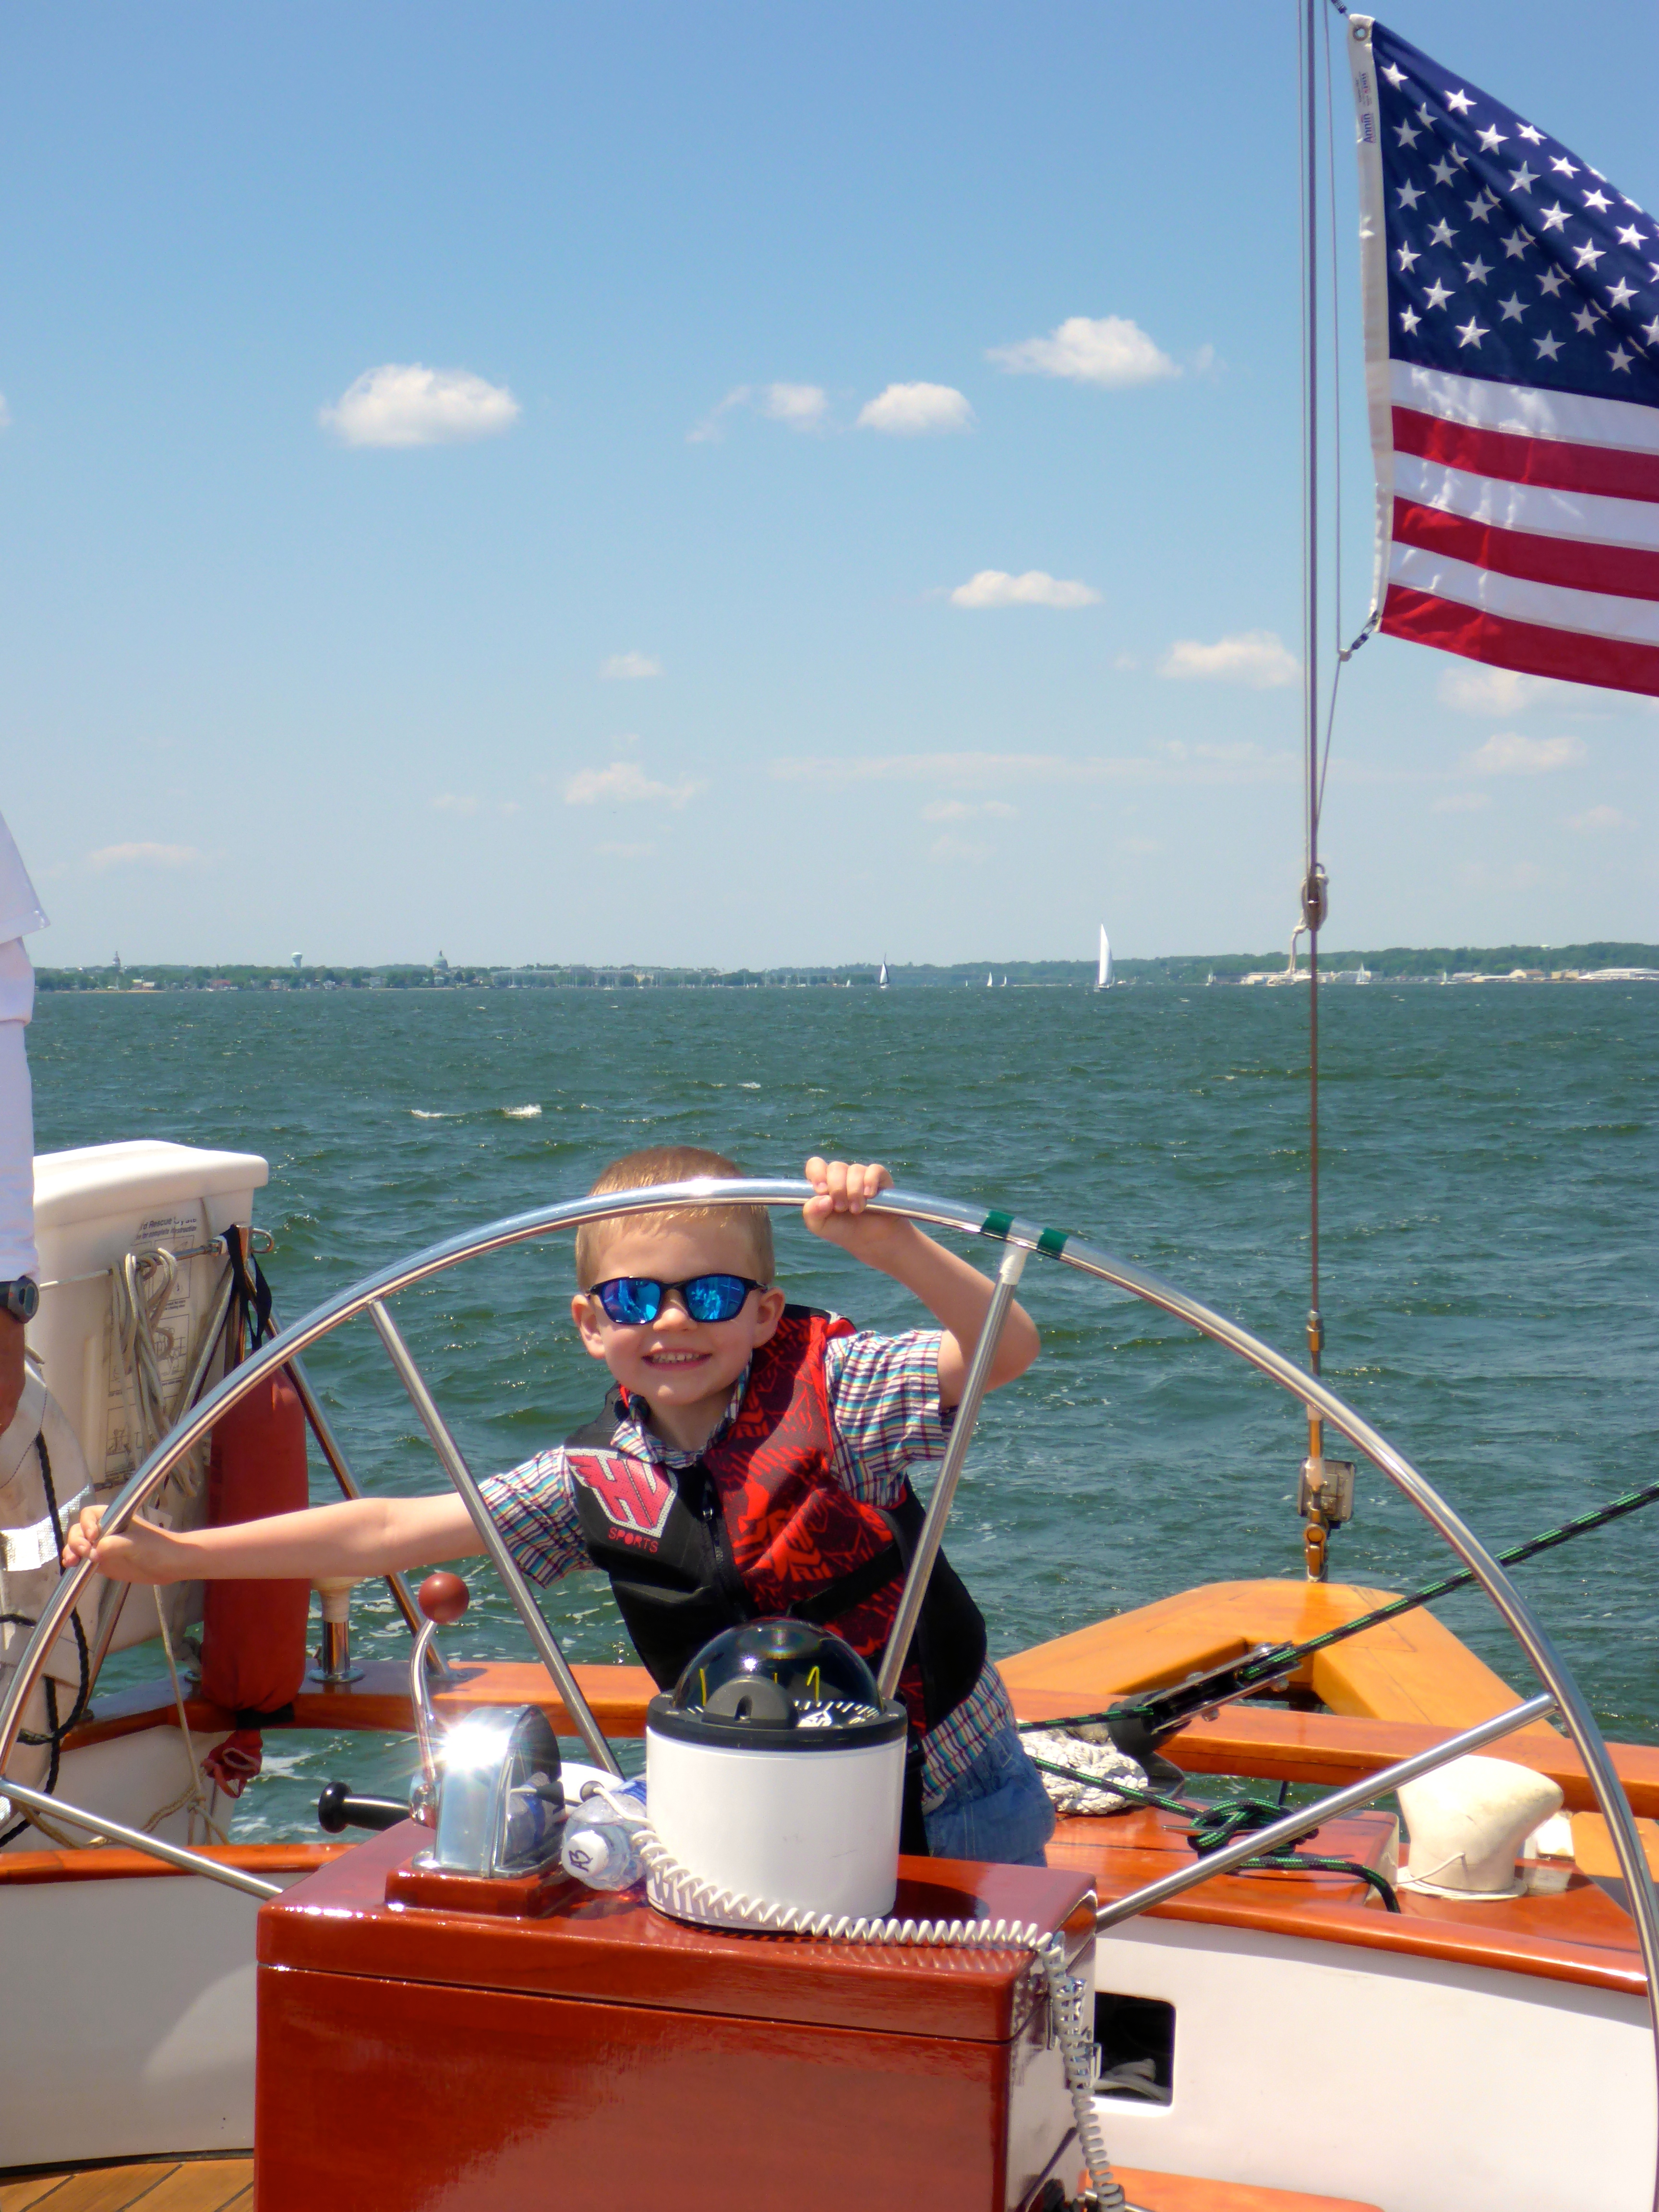 Small boy with sunglasses and life vest smiling as he peaks through the wheel of the schooner